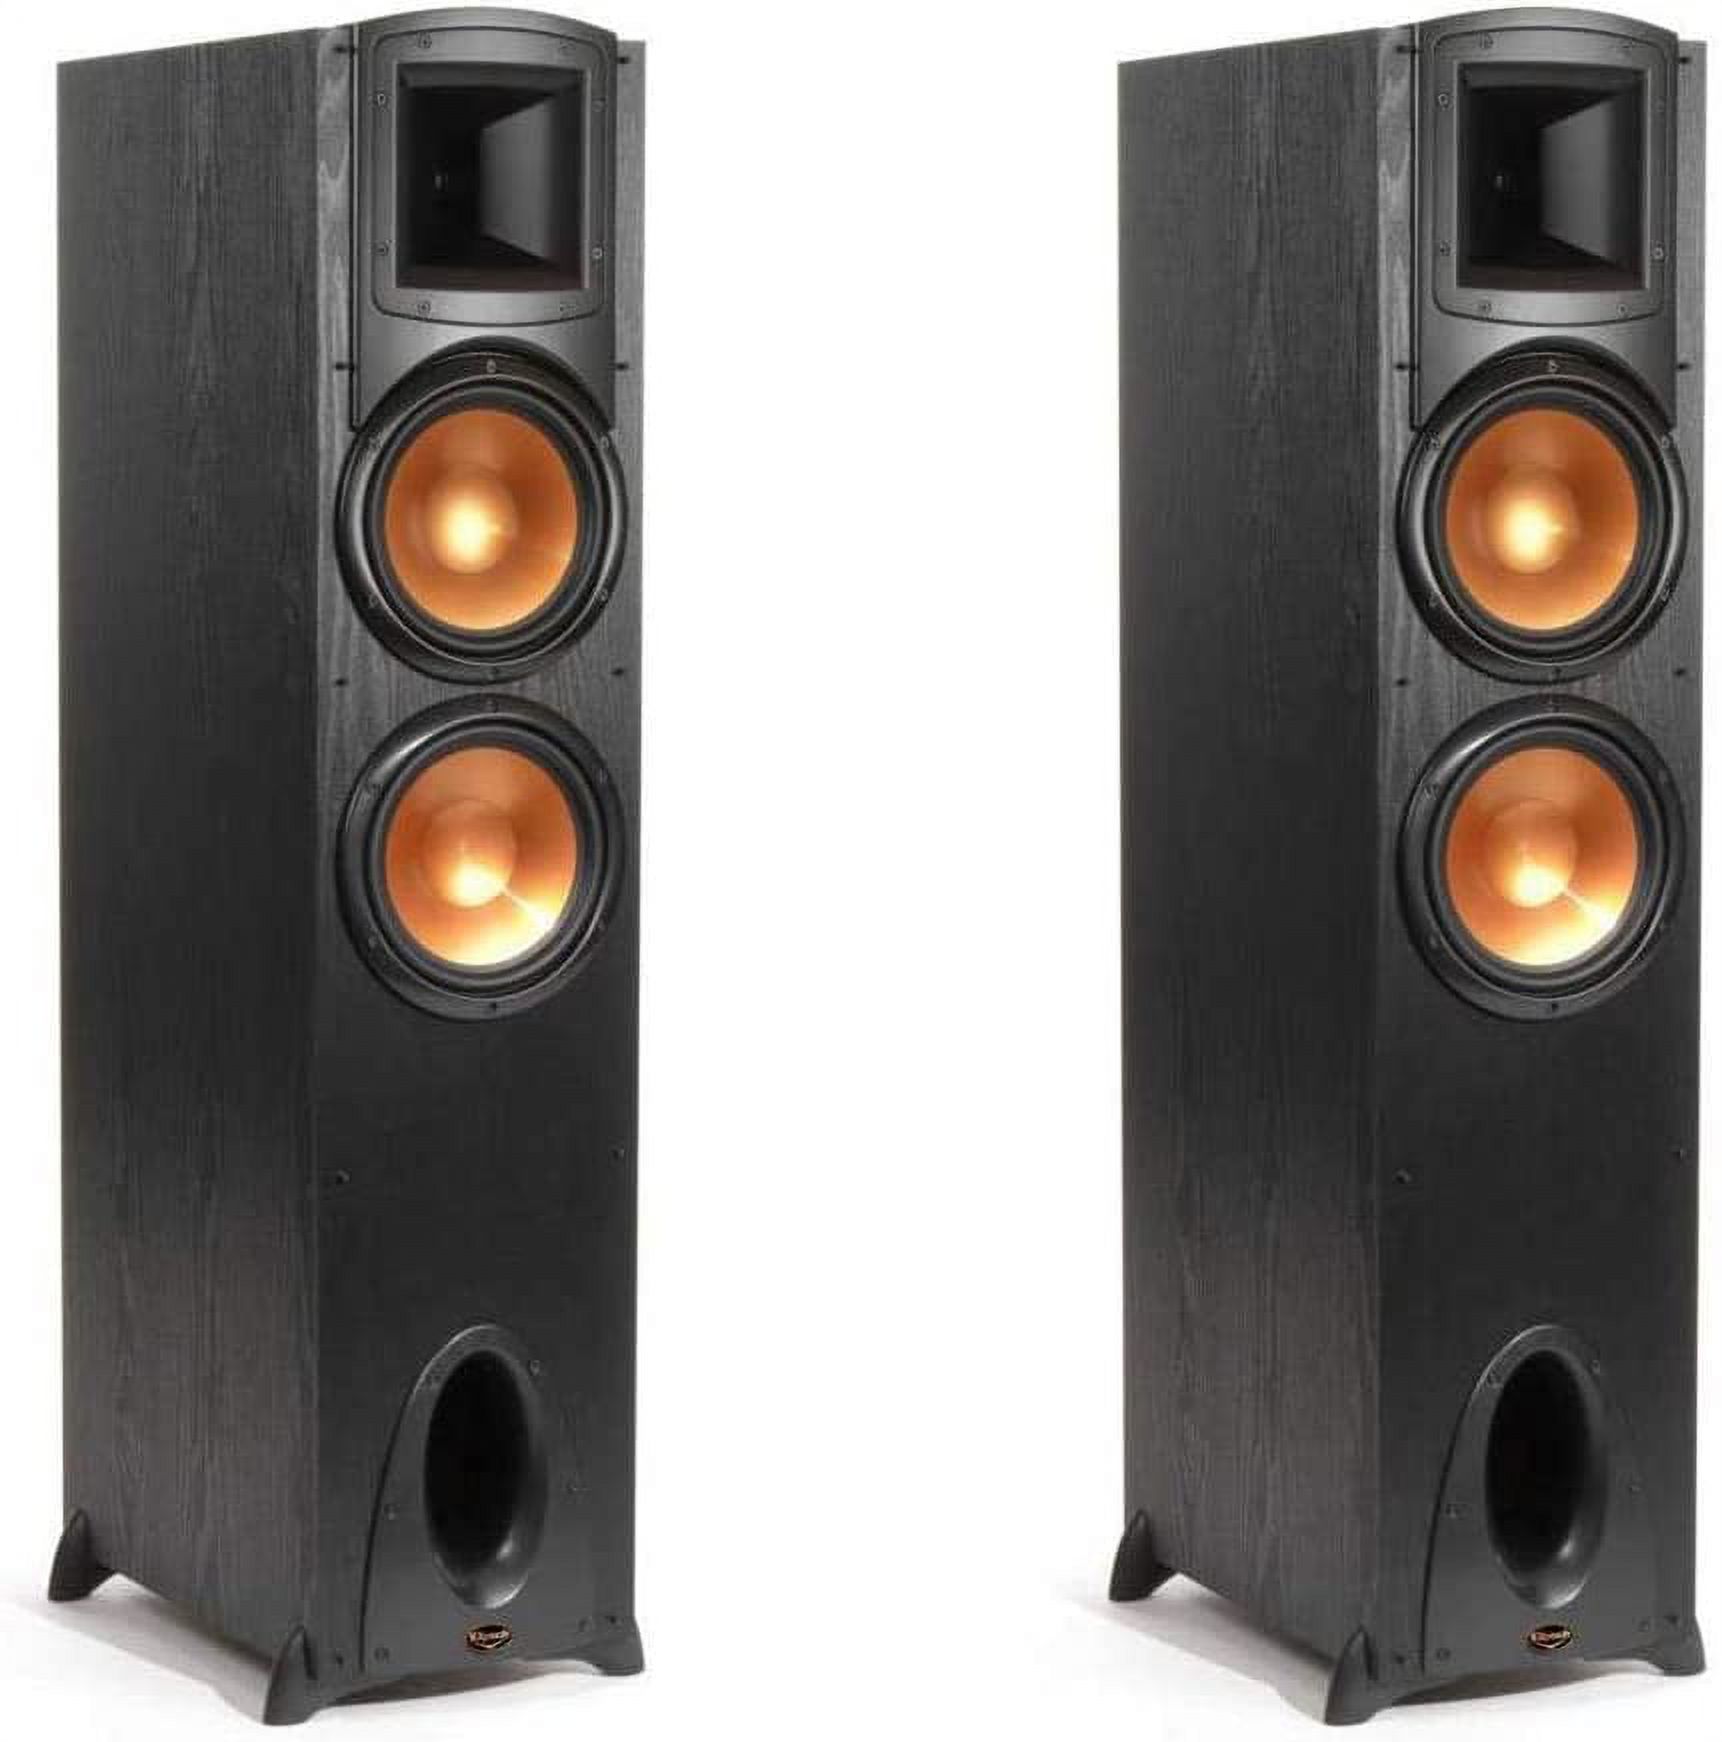 Klipsch Synergy Black Label F-300 Floorstanding Speaker with Dual 8" Woofers, Pair - image 1 of 5